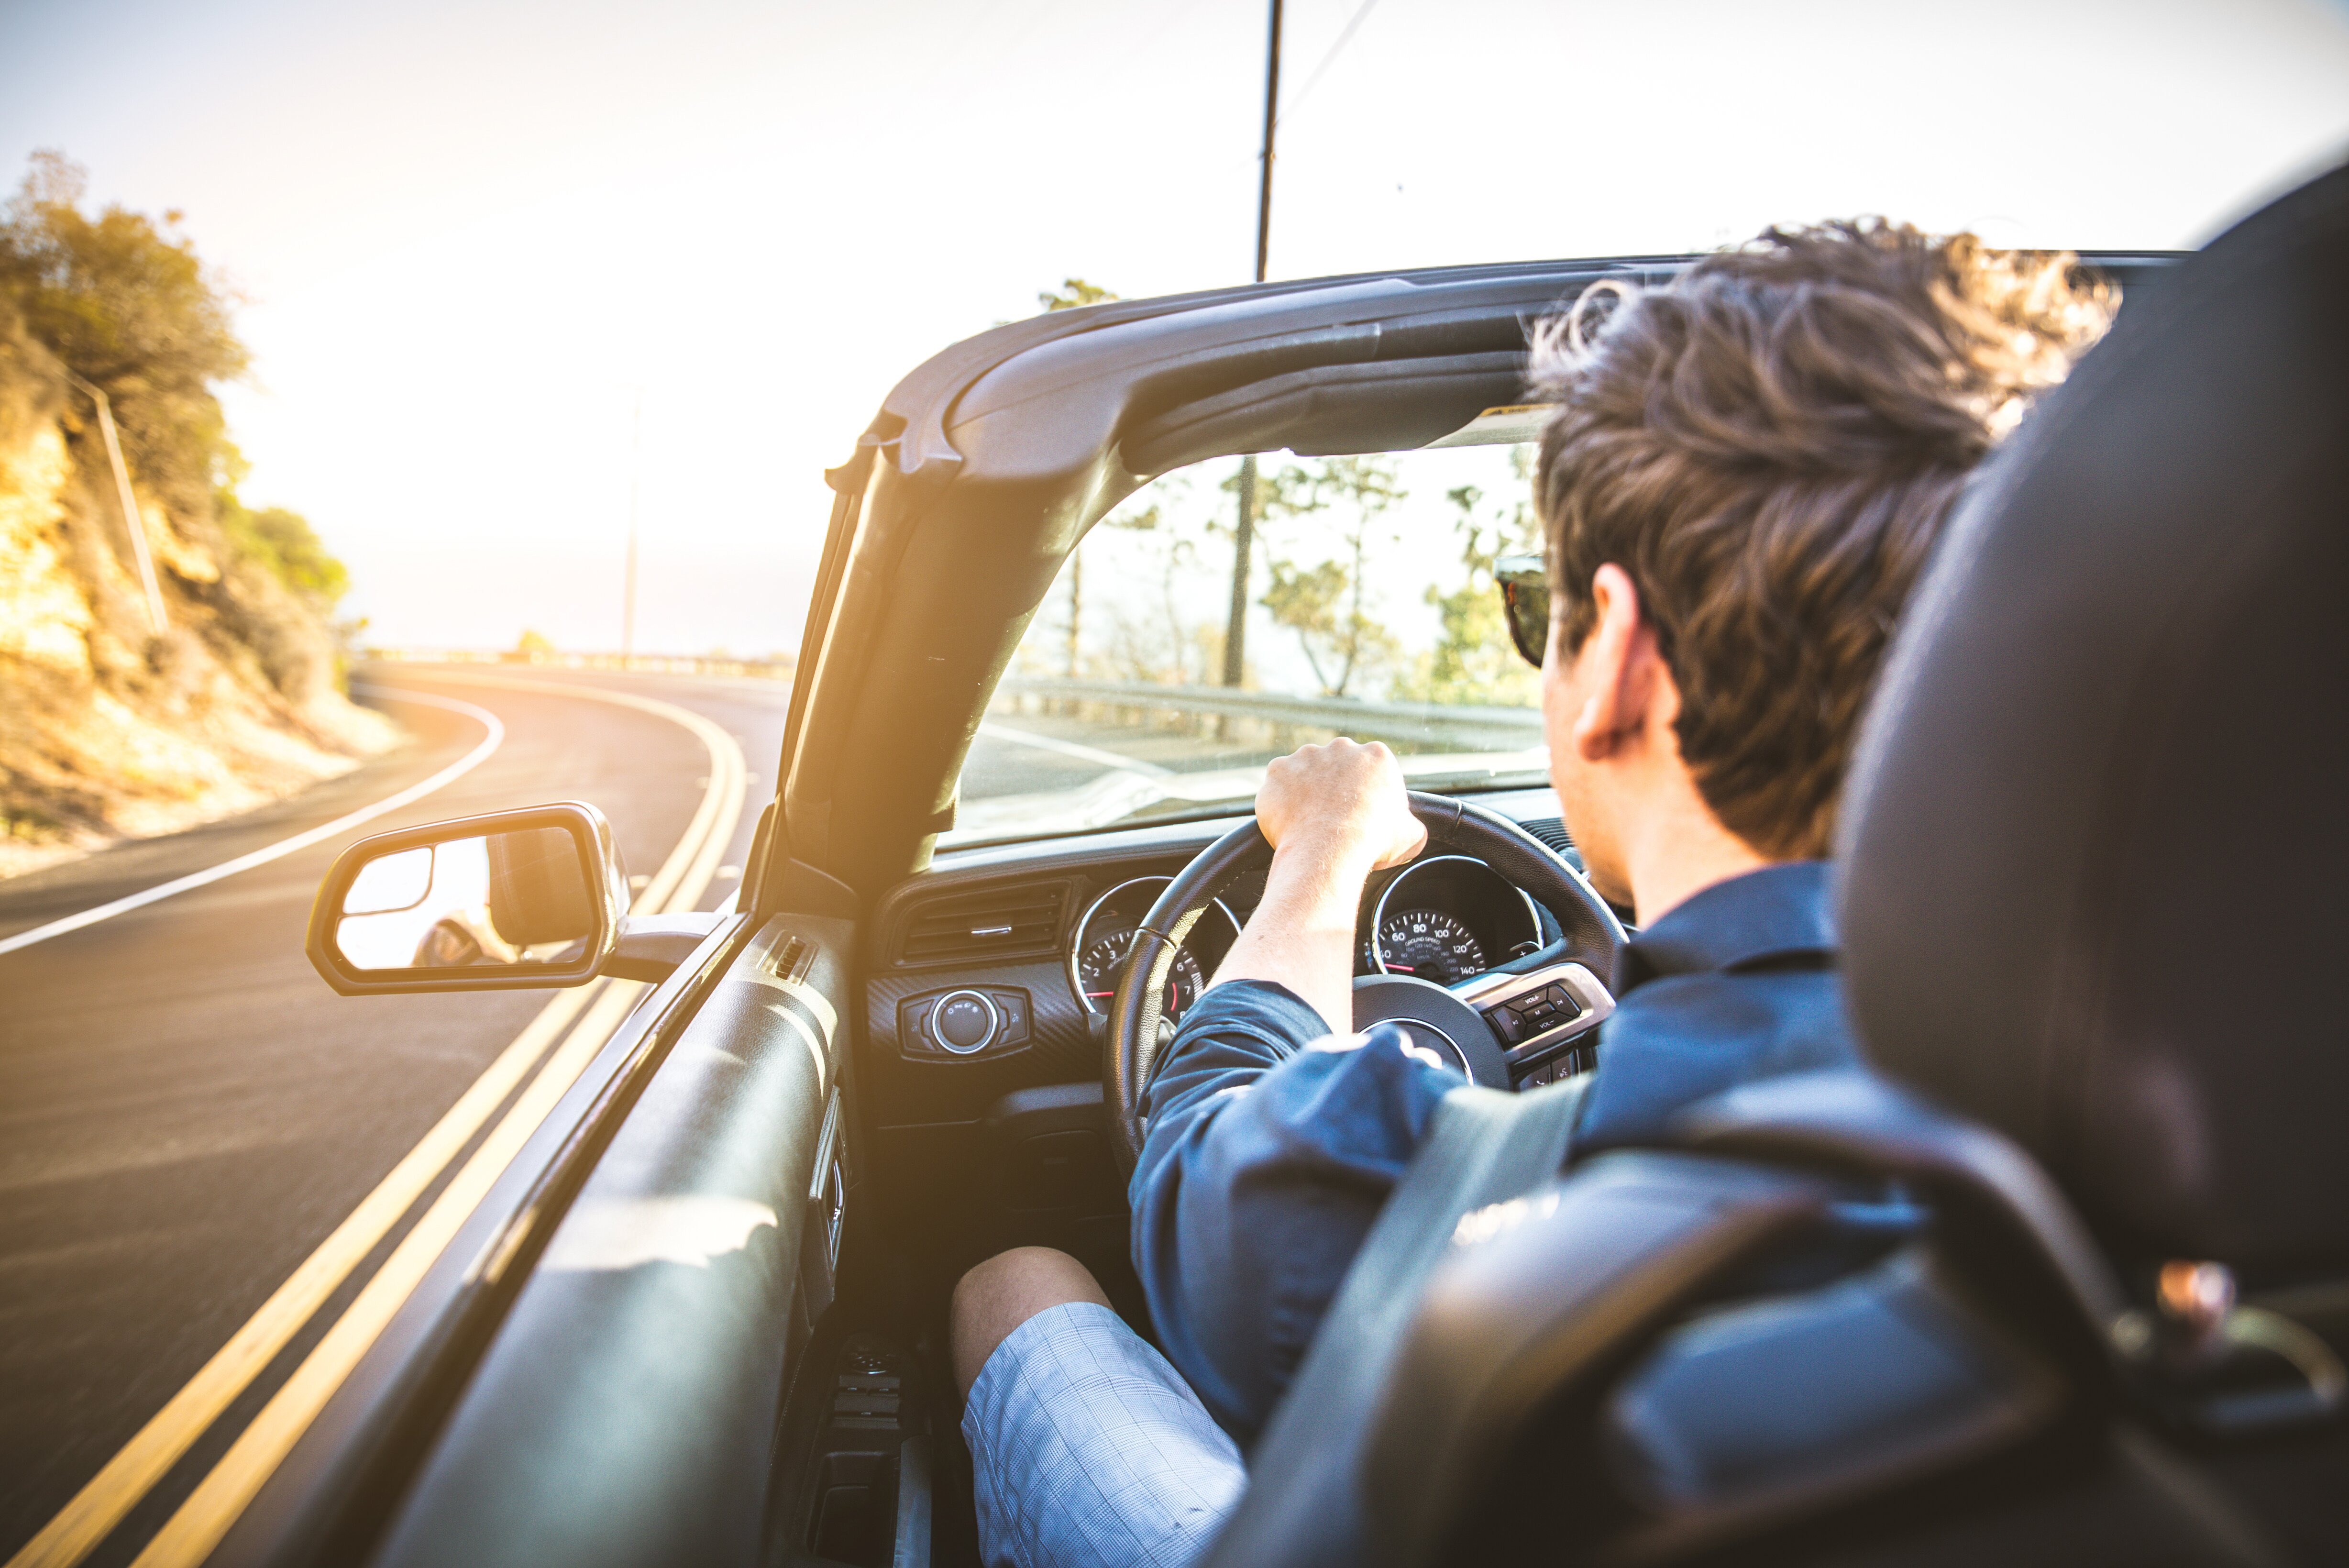 Do convertibles cost more to insure than regular vehicles